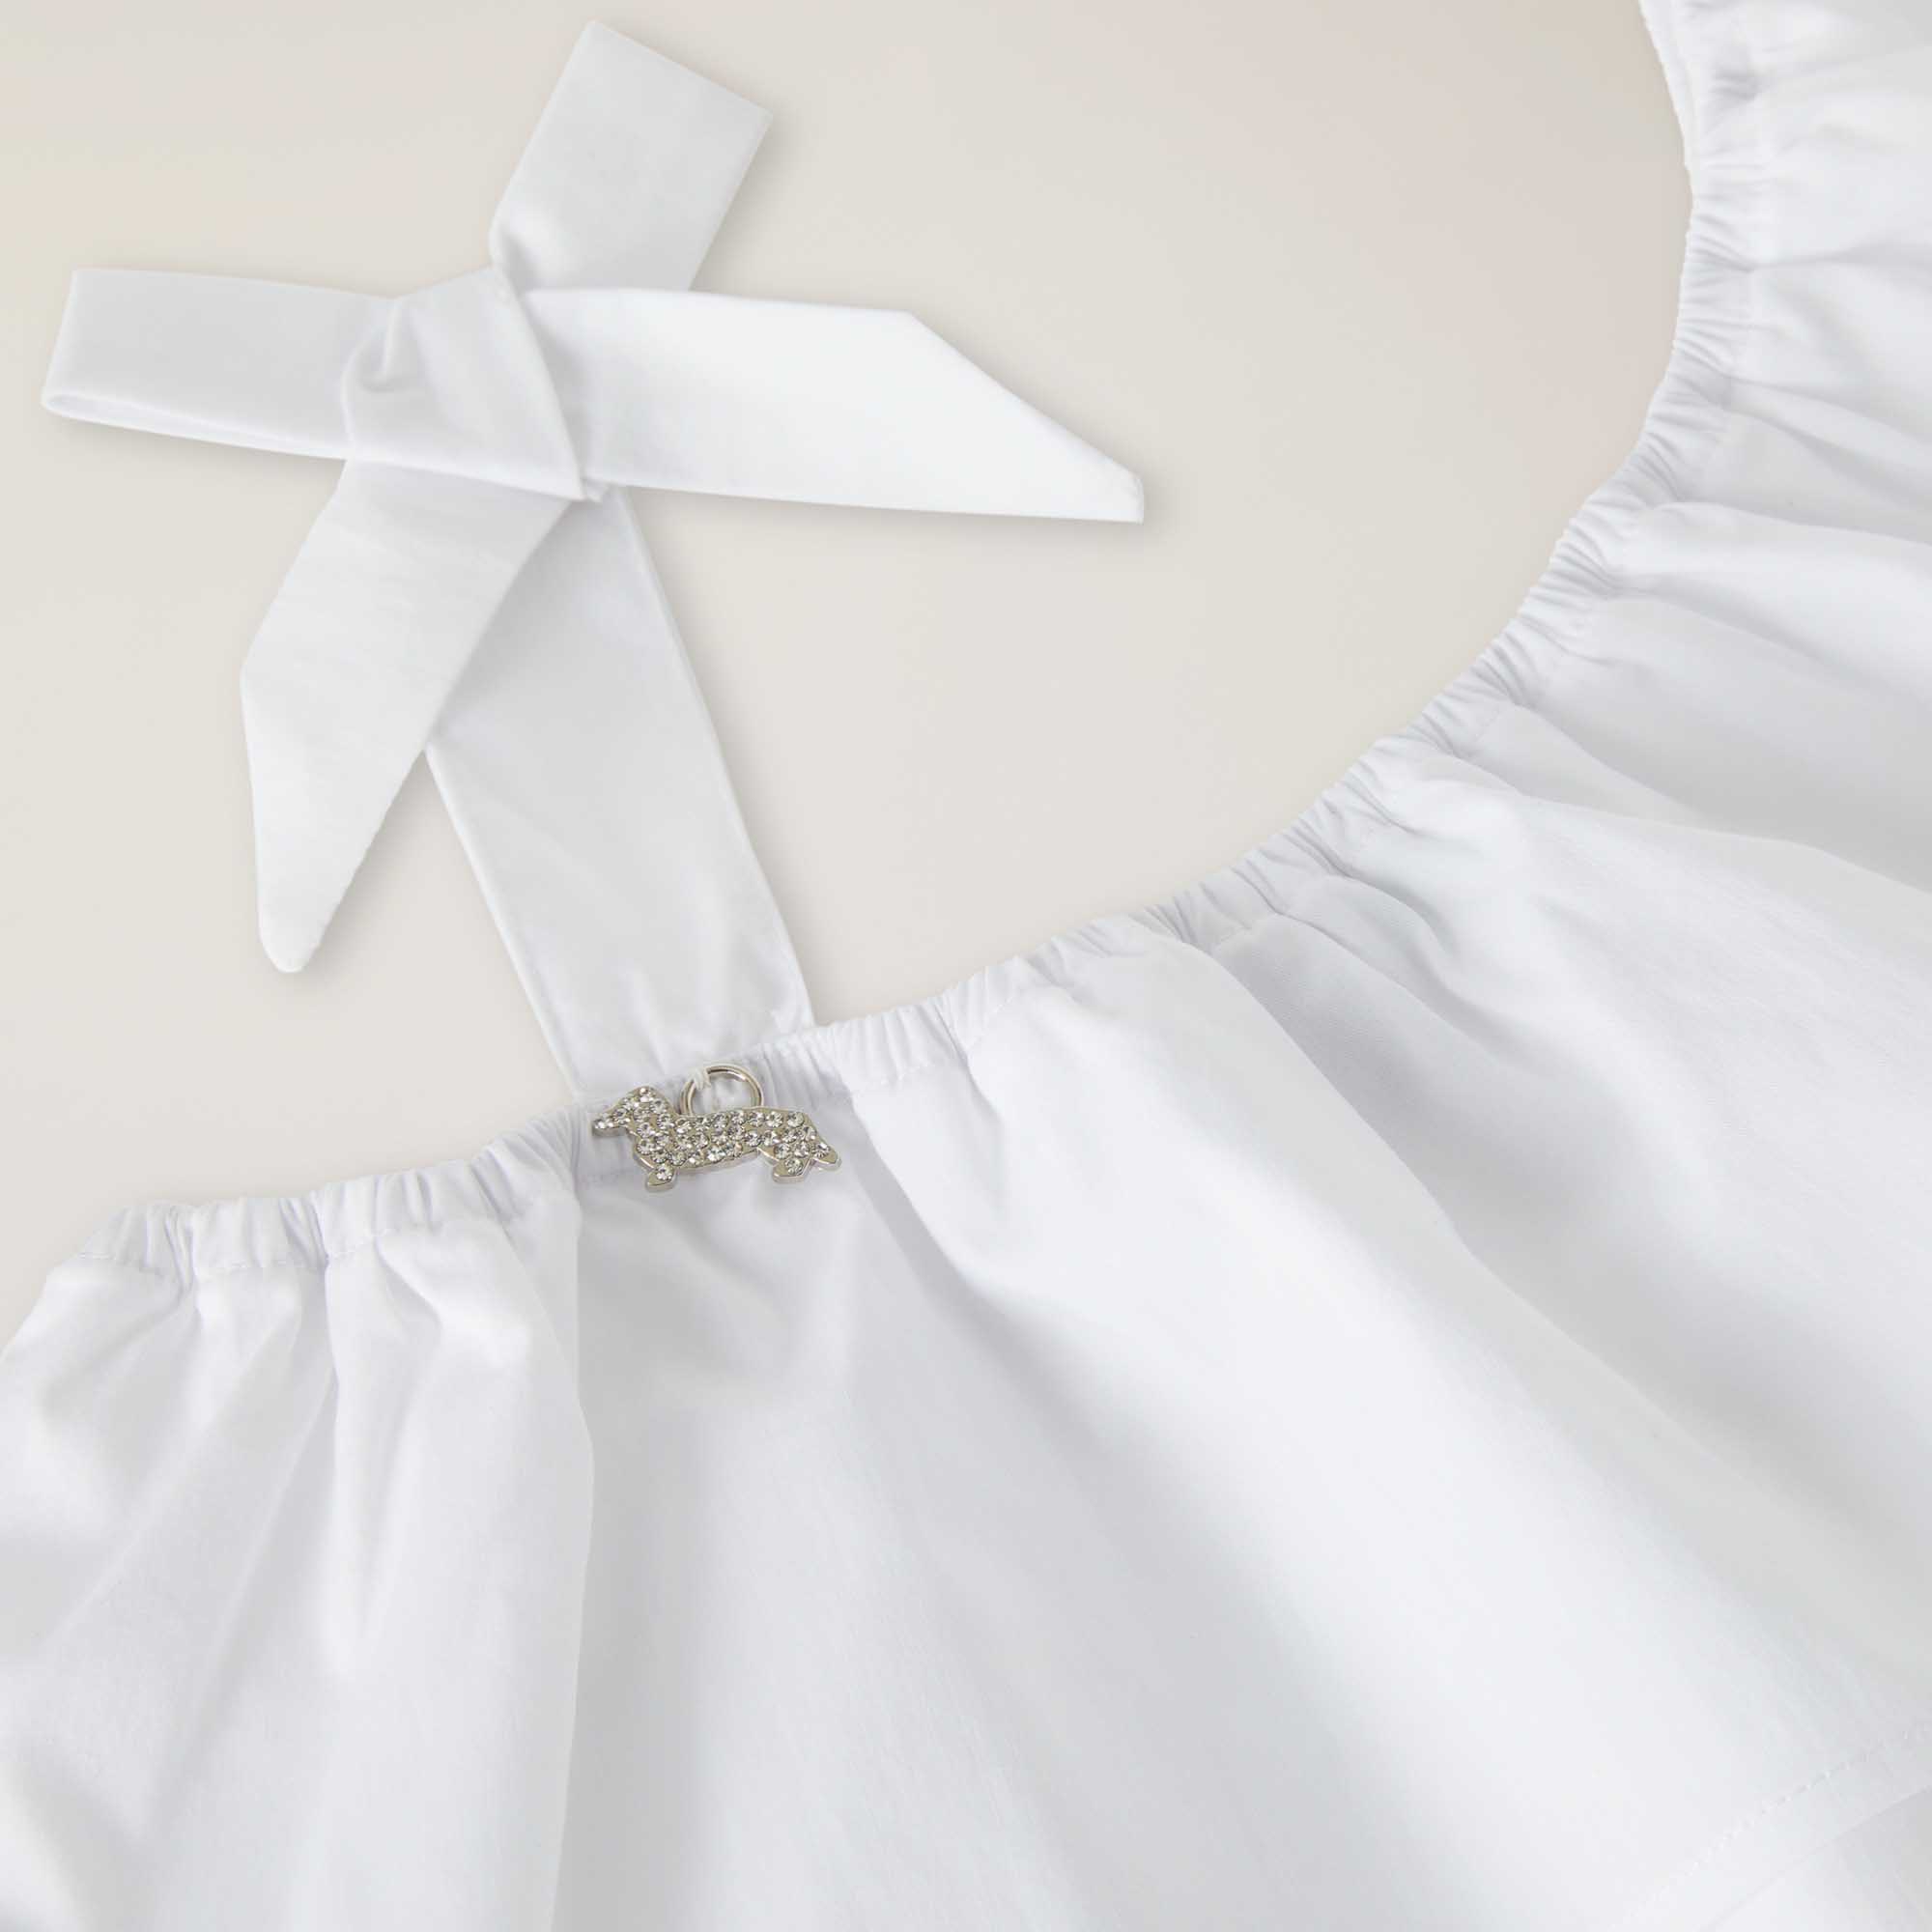 Top with ruffle and bow, White, large image number 2